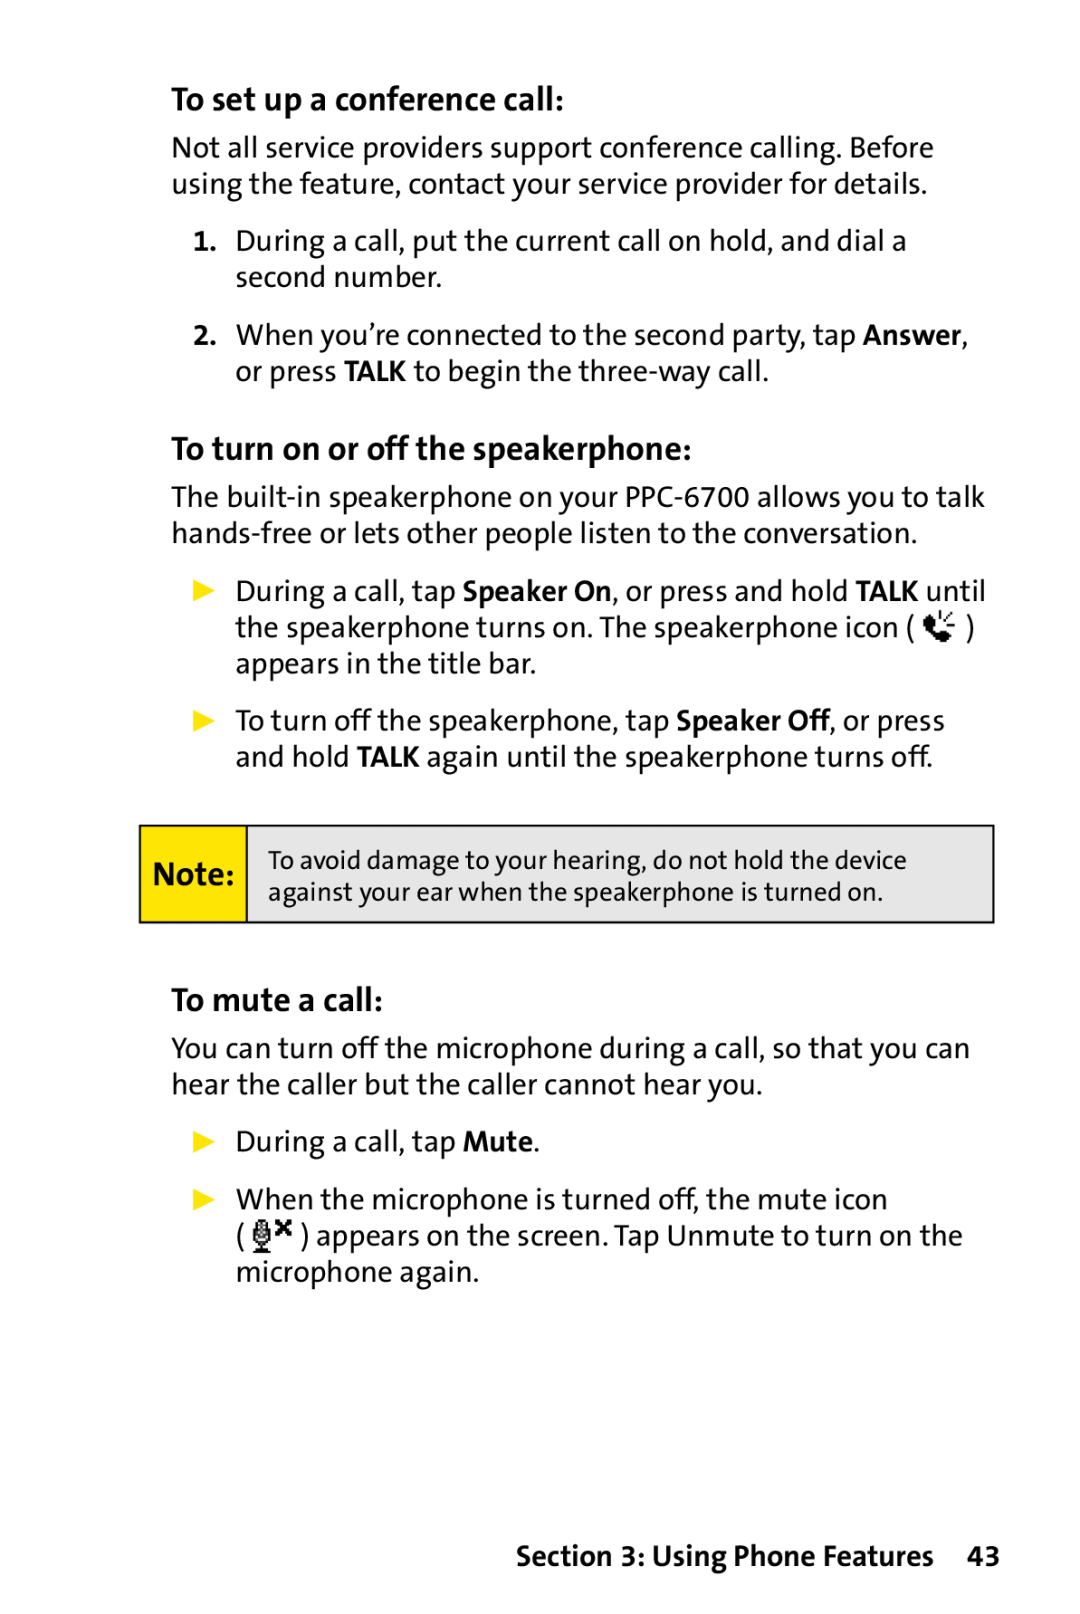 Sprint Nextel PPC-6700 manual To set up a conference call, To turn on or off the speakerphone, To mute a call 